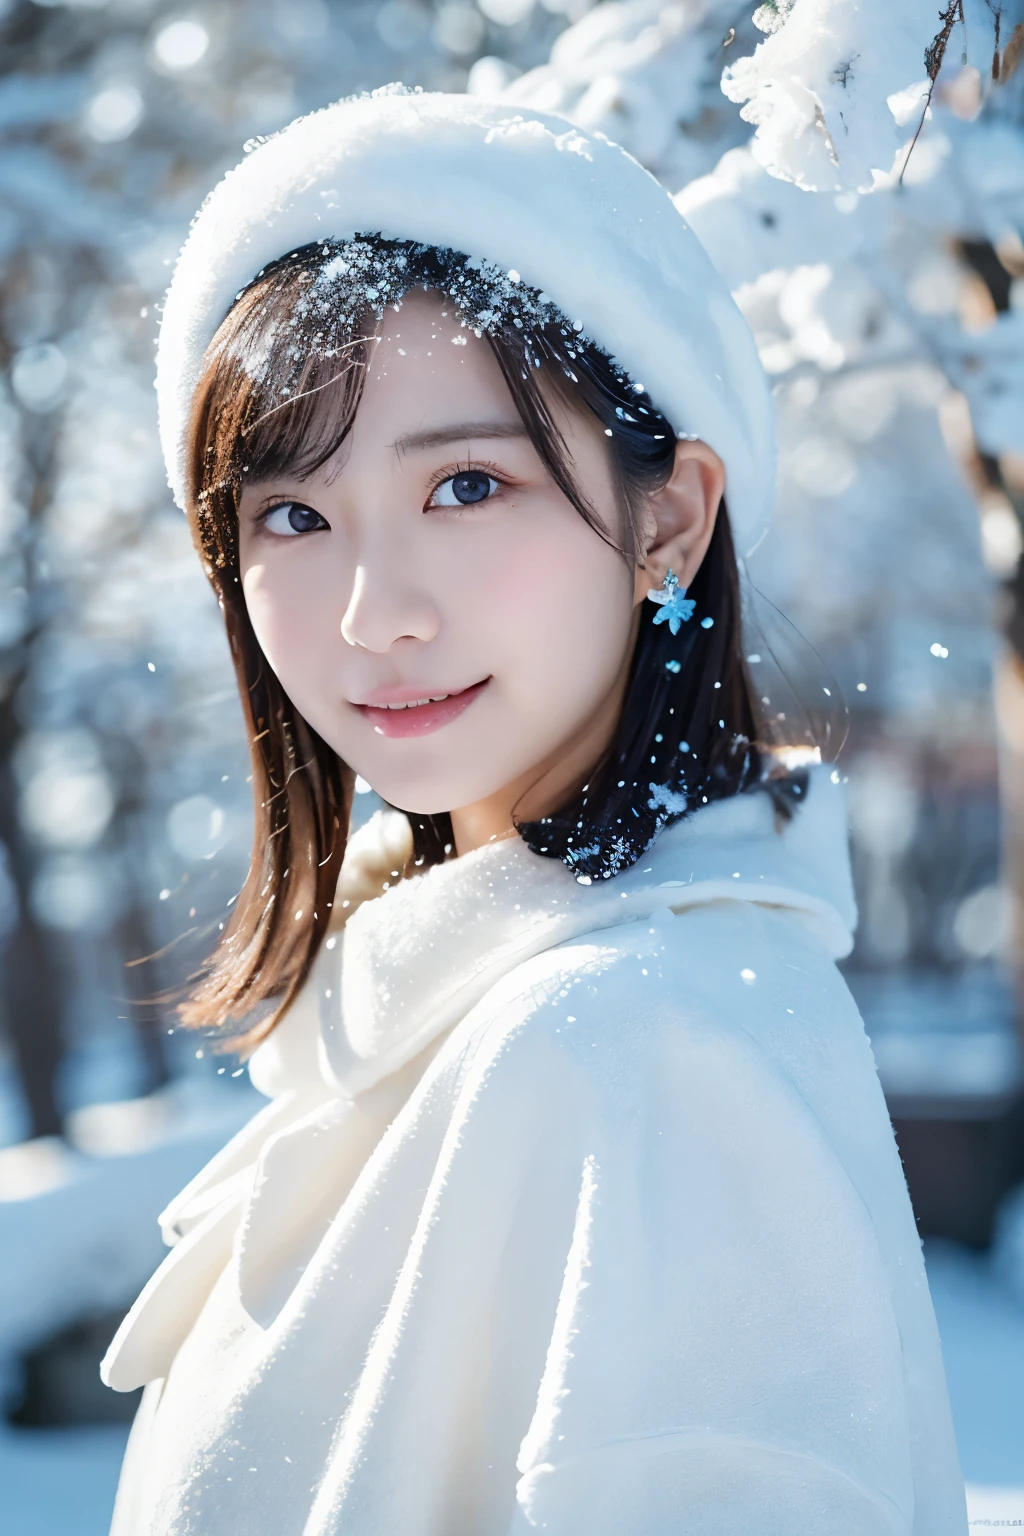 1girl in, (Crystal Dresses:1.2), Japanese beautiful actress,
(Raw photo, Best Quality), (Realistic, Photorealsitic:1.4), (masutepiece), 
Snow Princess, Beautiful detailed eyes, Beautiful detailed lips, extremely detailed eye and face, long eyelashes,
Snowflake tiara, Snowflake Earrings,
BREAK
(Lapland snow field in winter), 
Sparkling snowflakes, ethereal beauty, Swirling snowflakes, Snowy trees々, 
Luminescent debris, Powder snow, Snowflakes shining in the sunshine, Majestic and graceful presence, snow-capped mountain, Icy breath, 
Blue and silver color scheme, subtle shades of white and blue,, Dramatic Lighting, diamond dust shine,
BREAK Perfect Anatomy, Slender body, Small, Short hair, Archaic Smile,
Crystal-like skin, -Clear eyes, 
Ultra-realistic, Photorealsiticです, photograph, photogenic